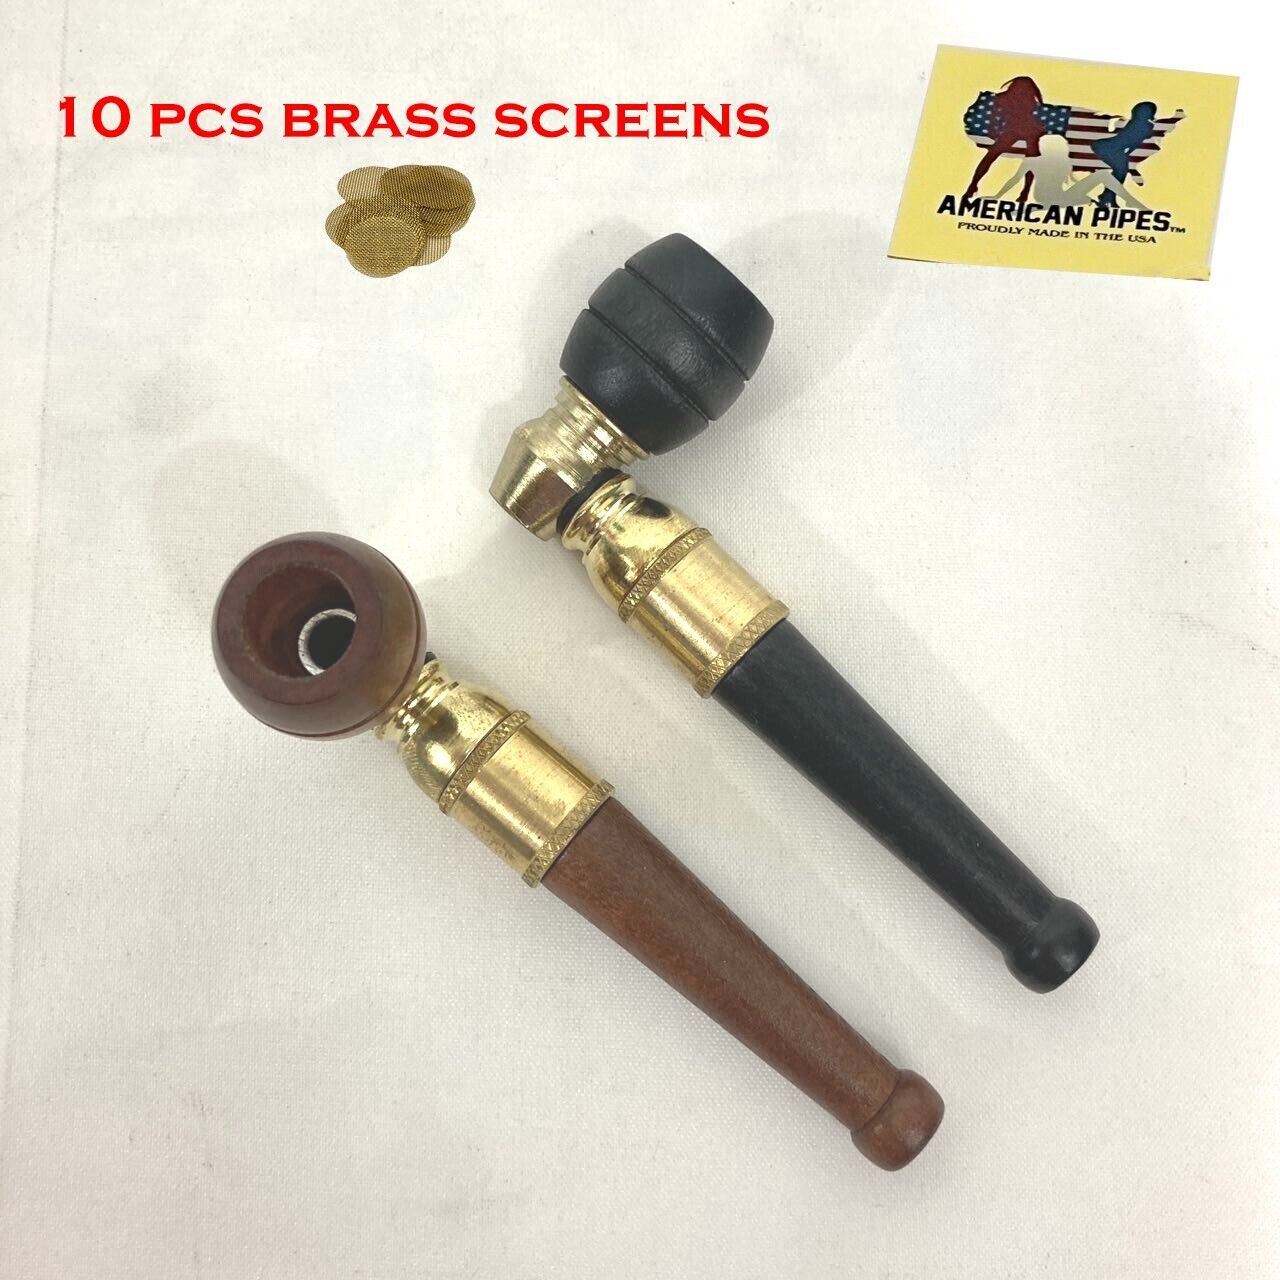 Americanpipes™️ set of 2 PC brass metal wooden Tobacco Smoking Pipe with screens